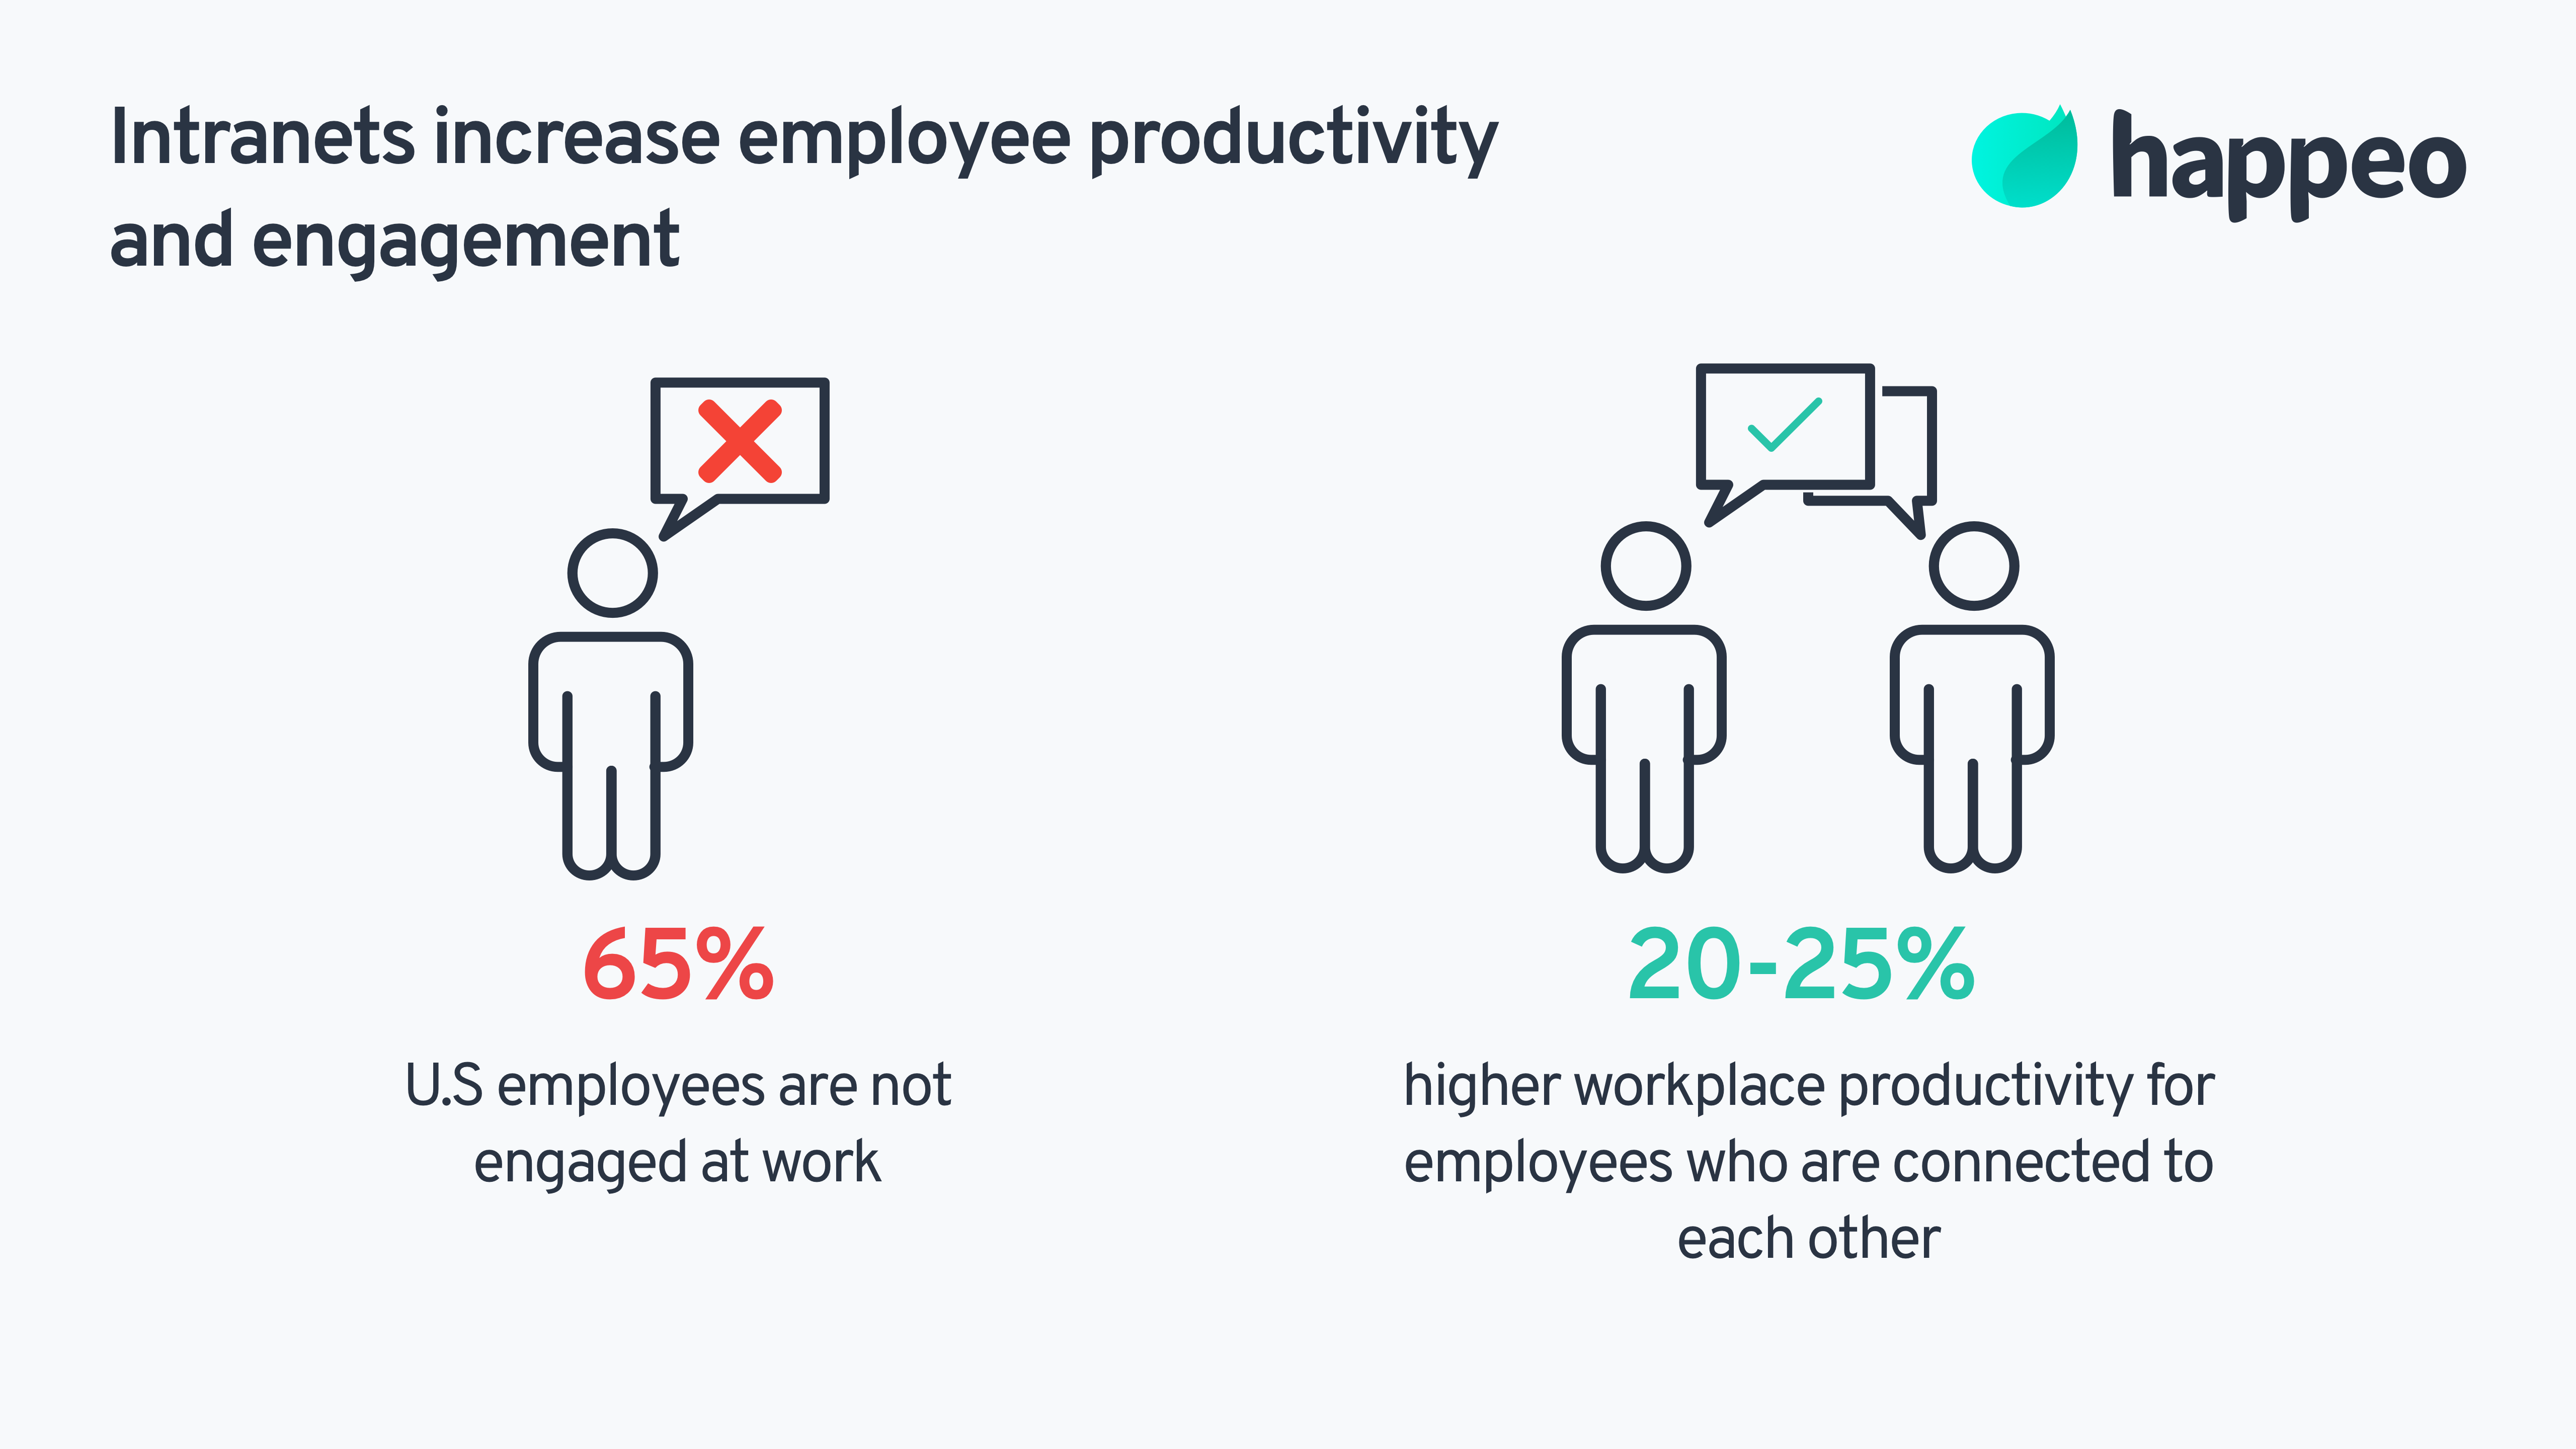 Intranets increase employee productivity and engagement